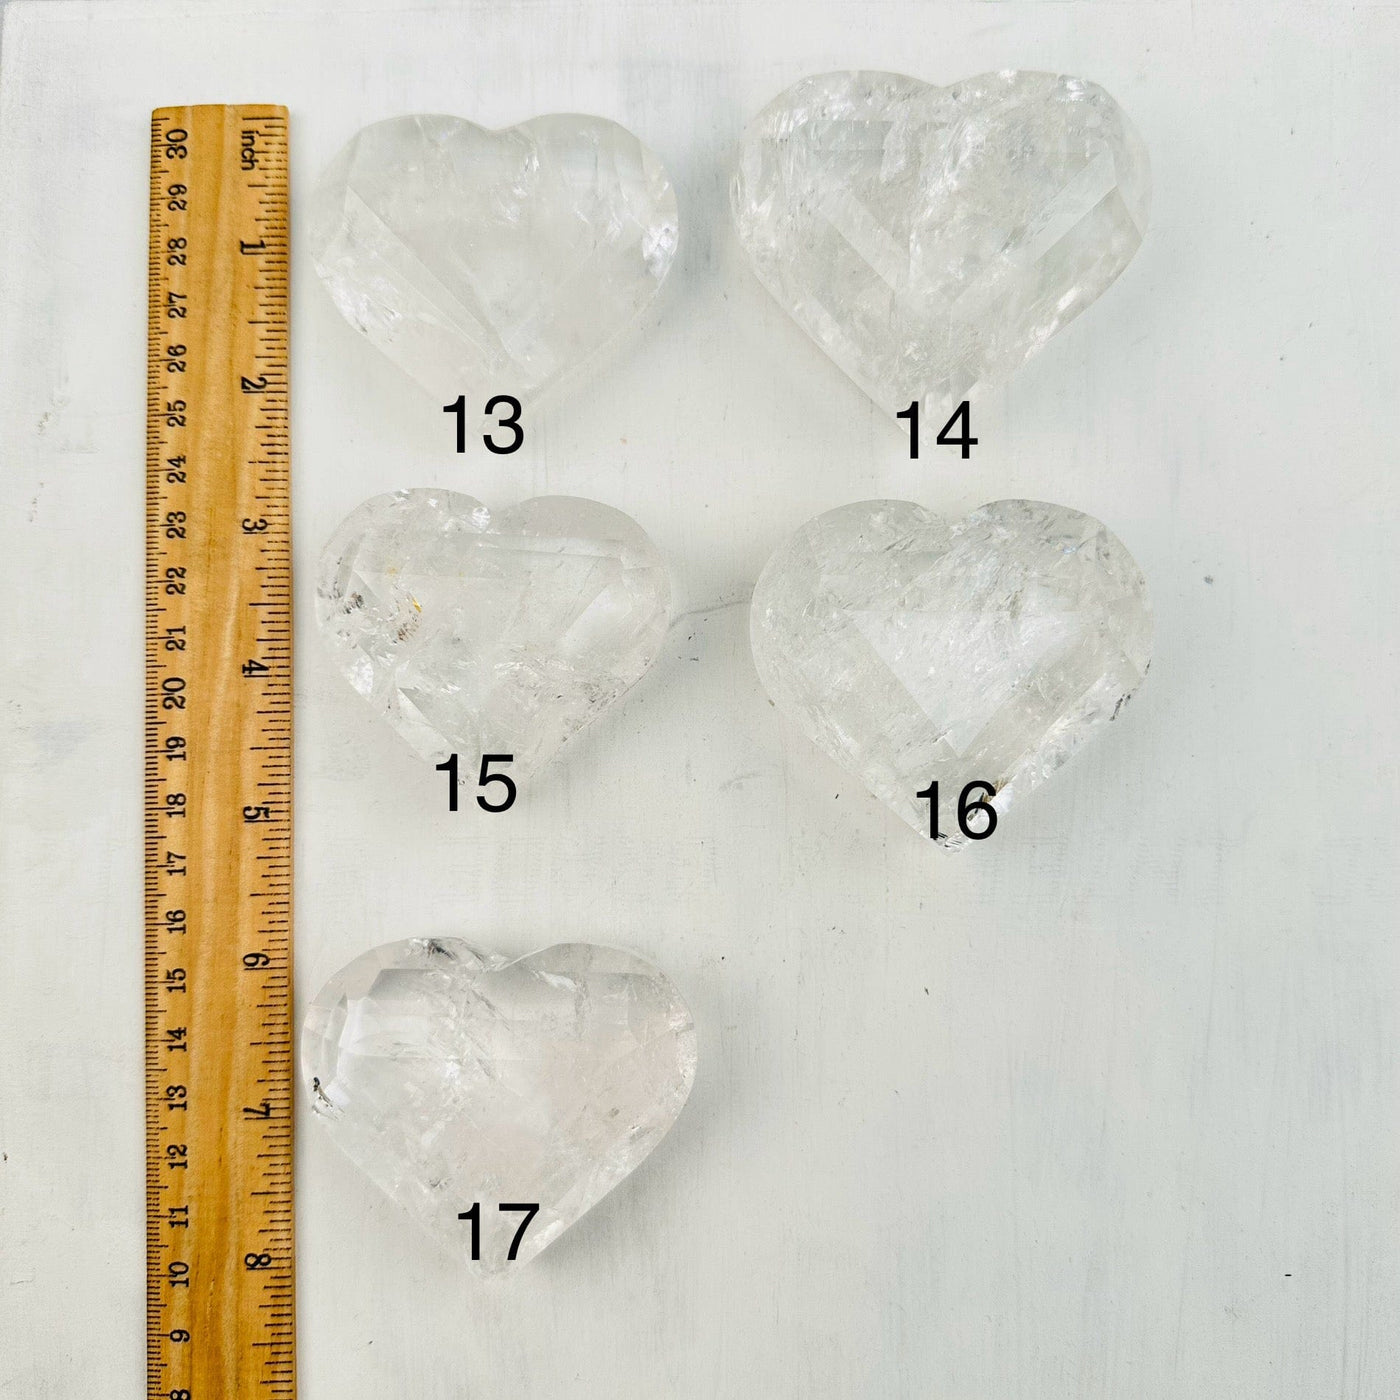 Faceted Crystal Quartz Heart - Crystal Heart - You Choose - next to a ruler for size reference